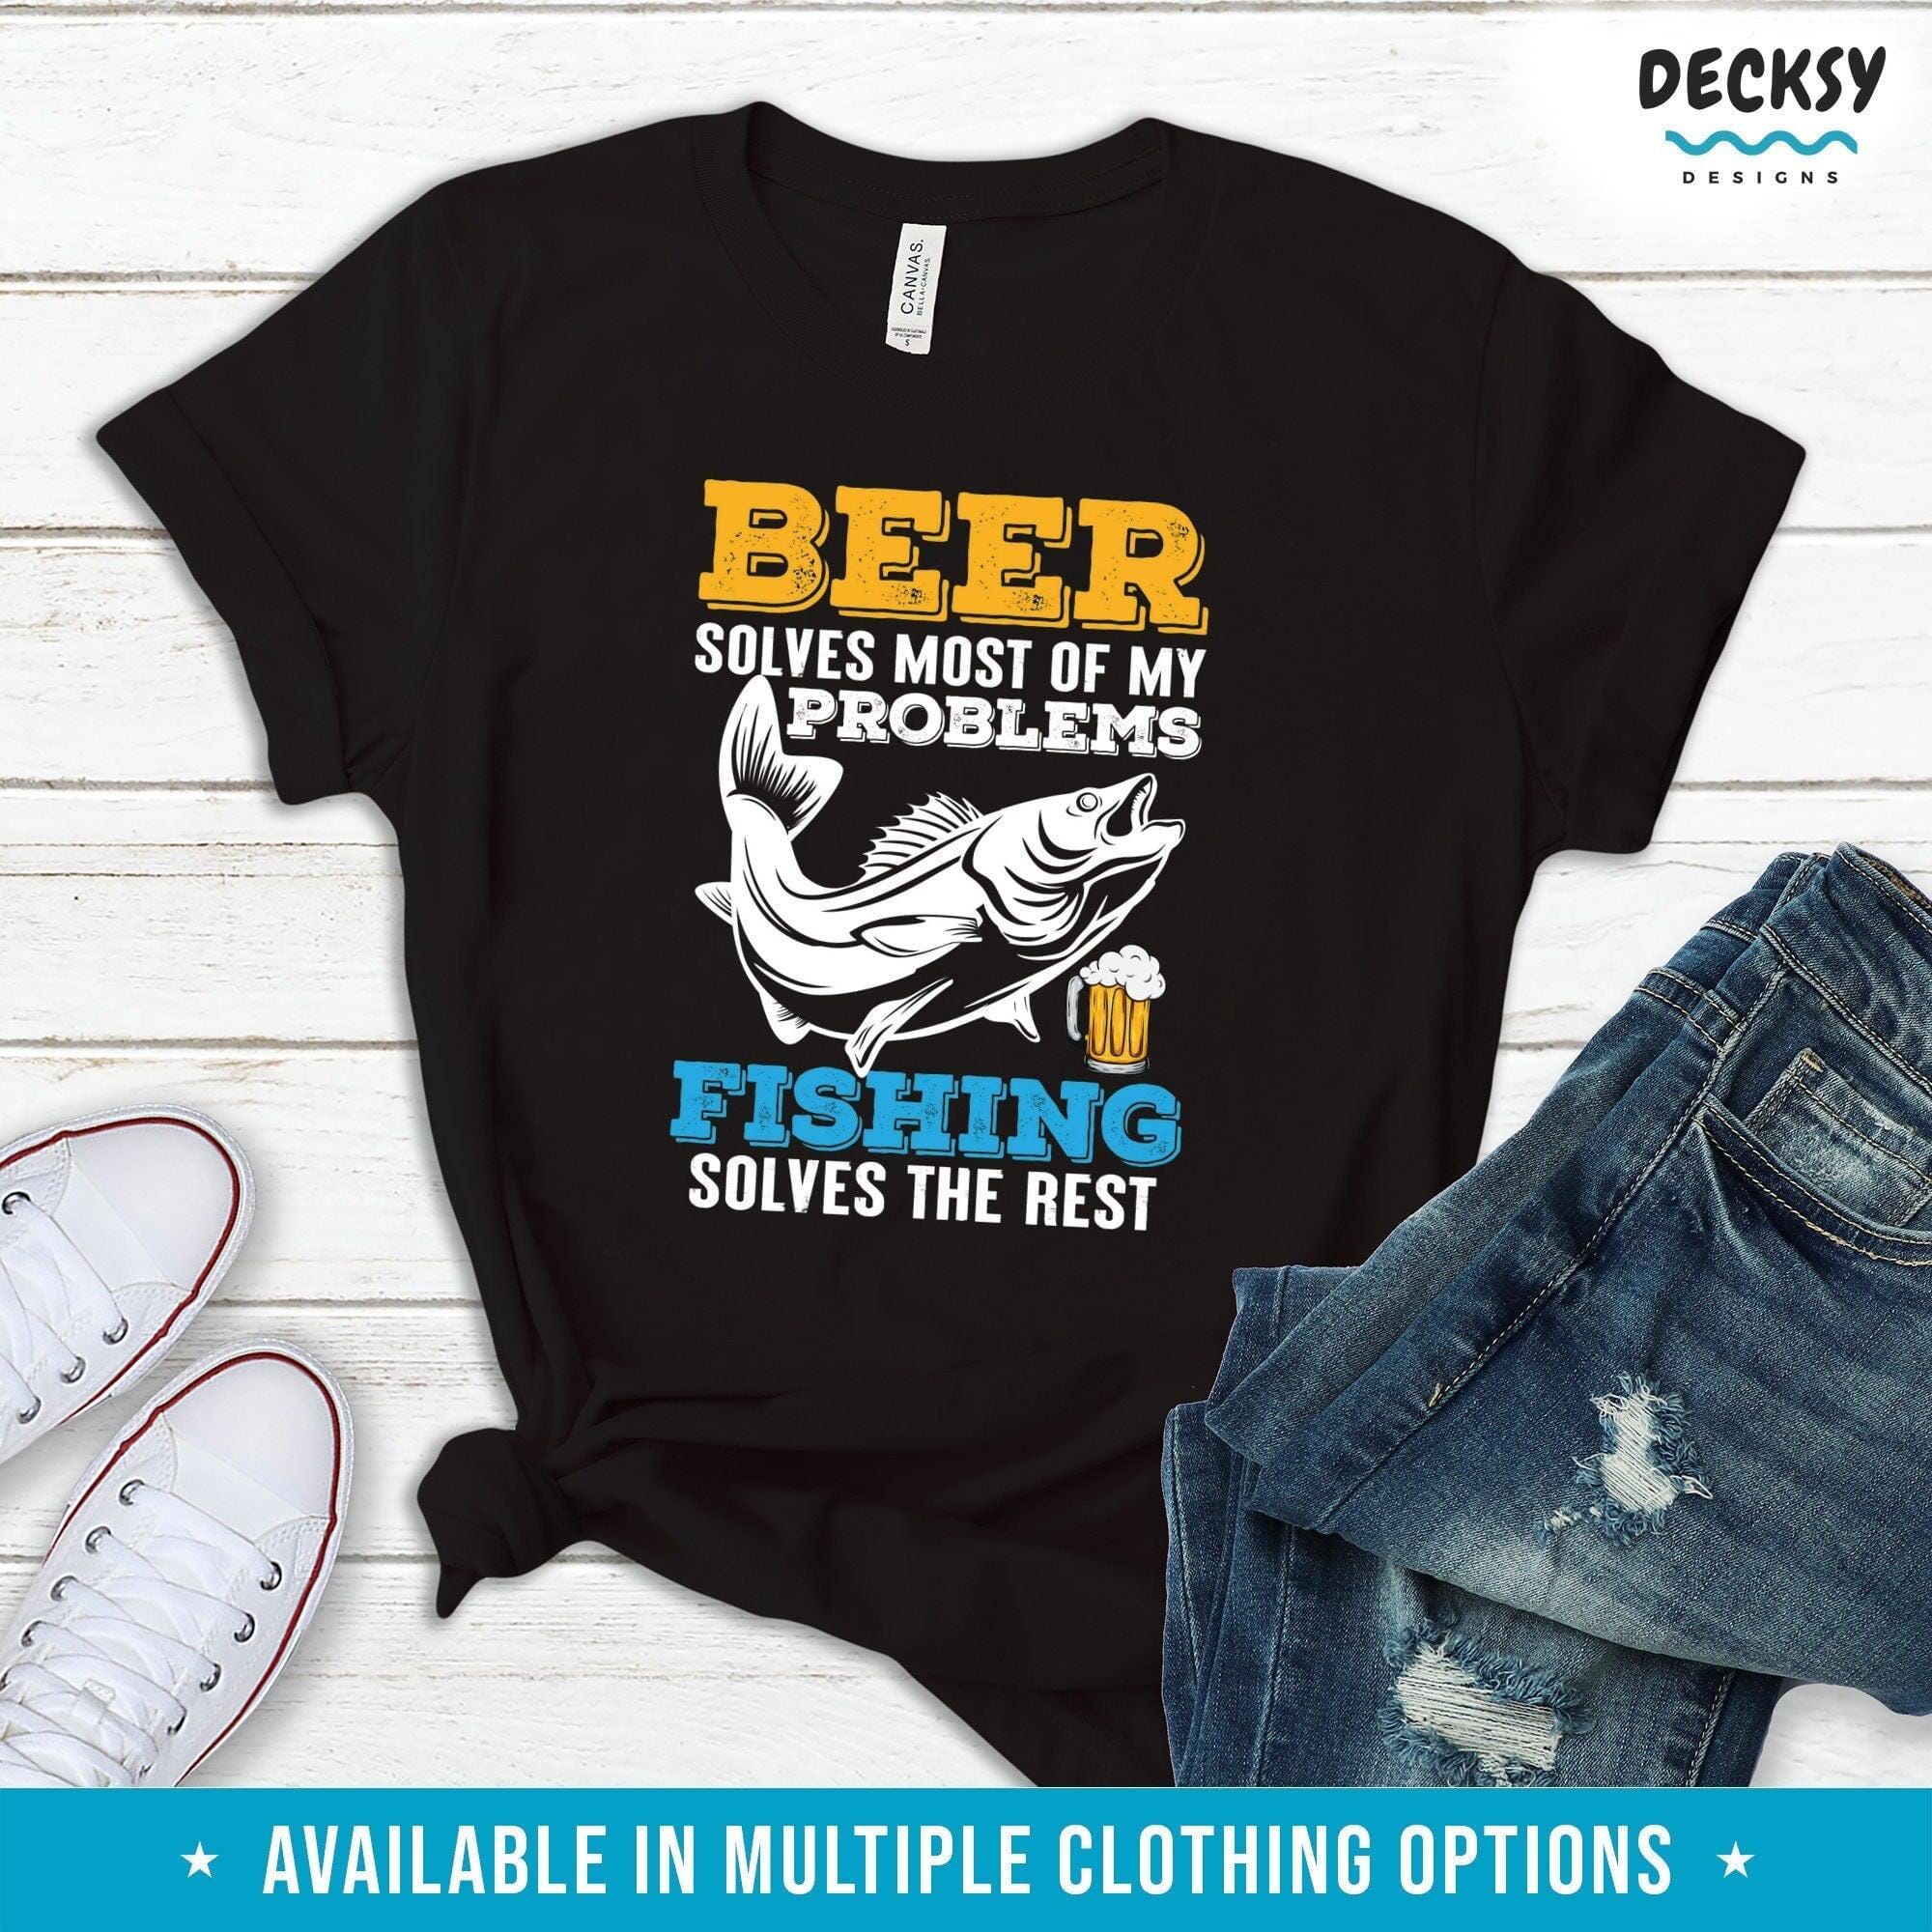 Beer And Fishing Shirt, Fishing Gift-Clothing:Gender-Neutral Adult Clothing:Tops & Tees:T-shirts:Graphic Tees-DecksyDesigns